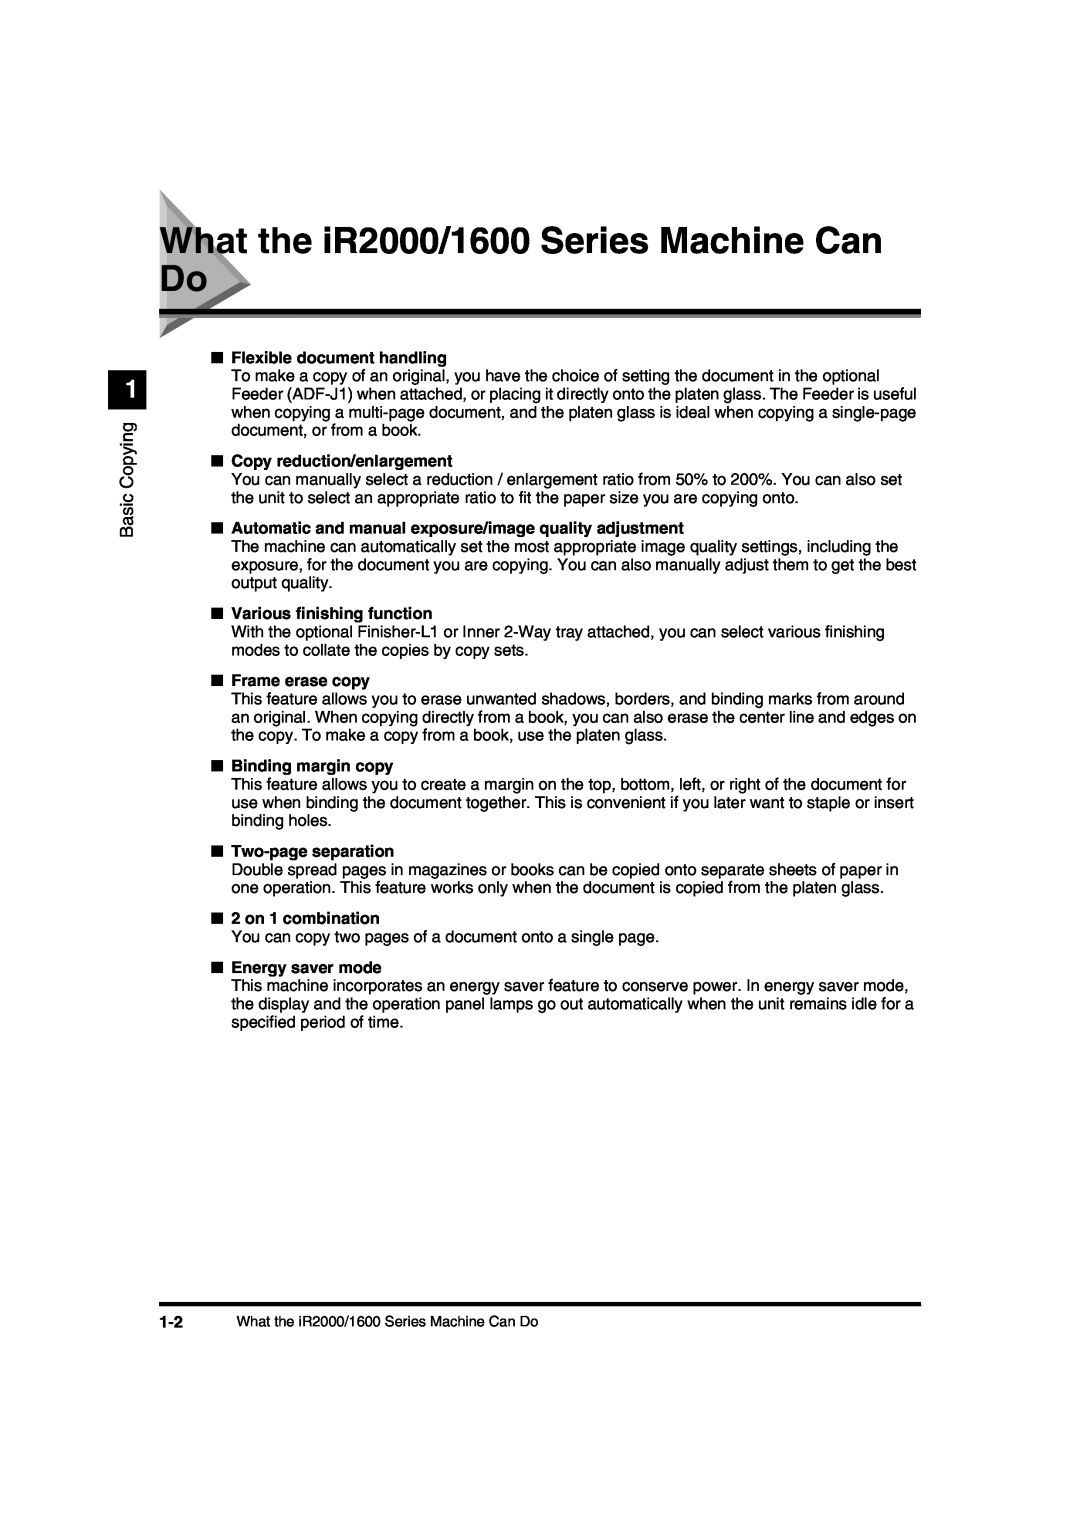 Canon IR1600 manual What the iR2000/1600 Series Machine Can Do, Basic Copying, Flexible document handling, Frame erase copy 